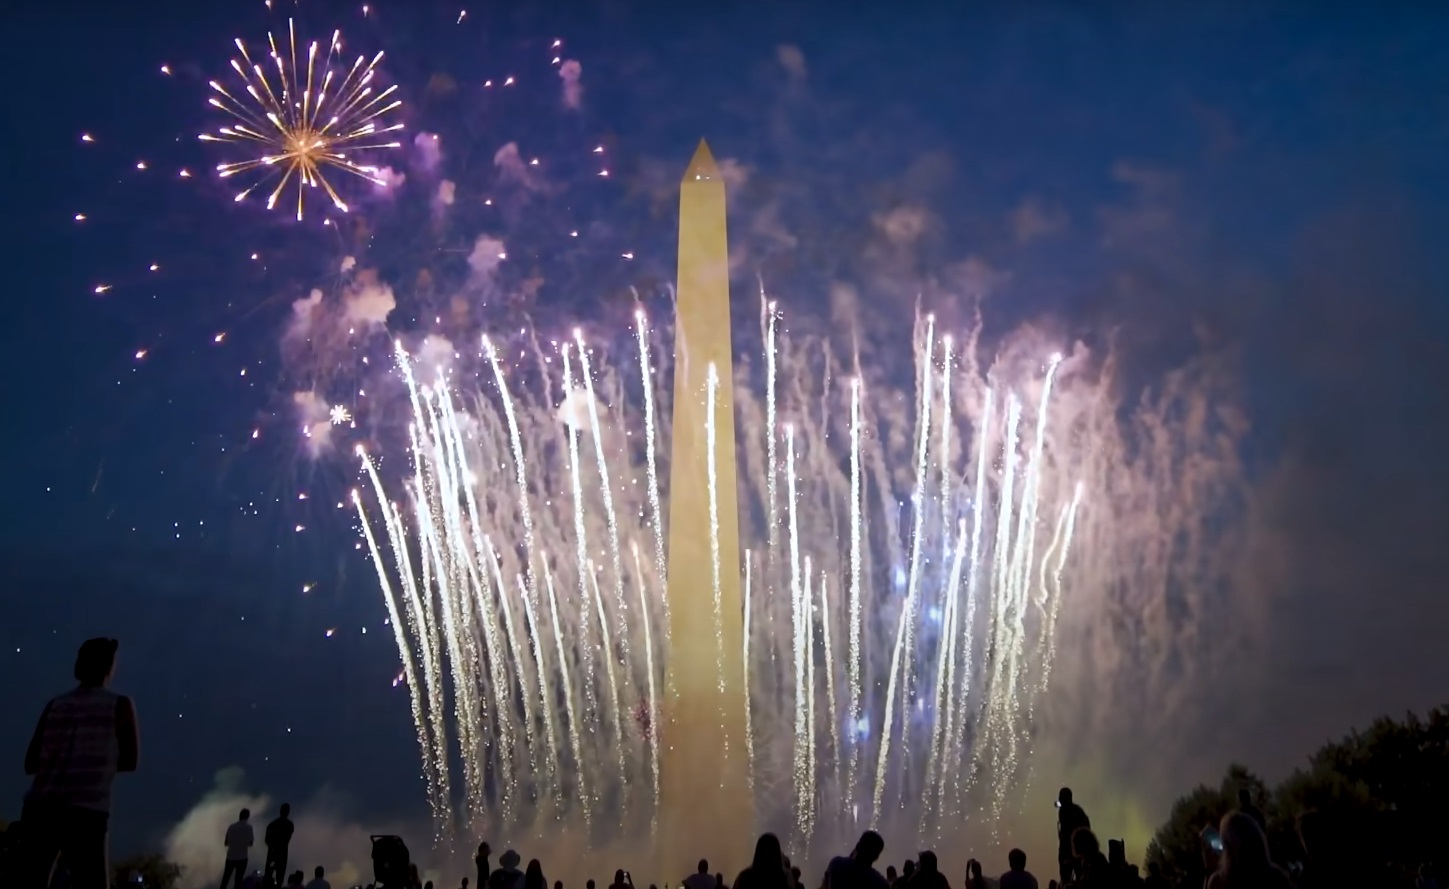 July Fourth loses meaning without commitment to America’s founding principles.